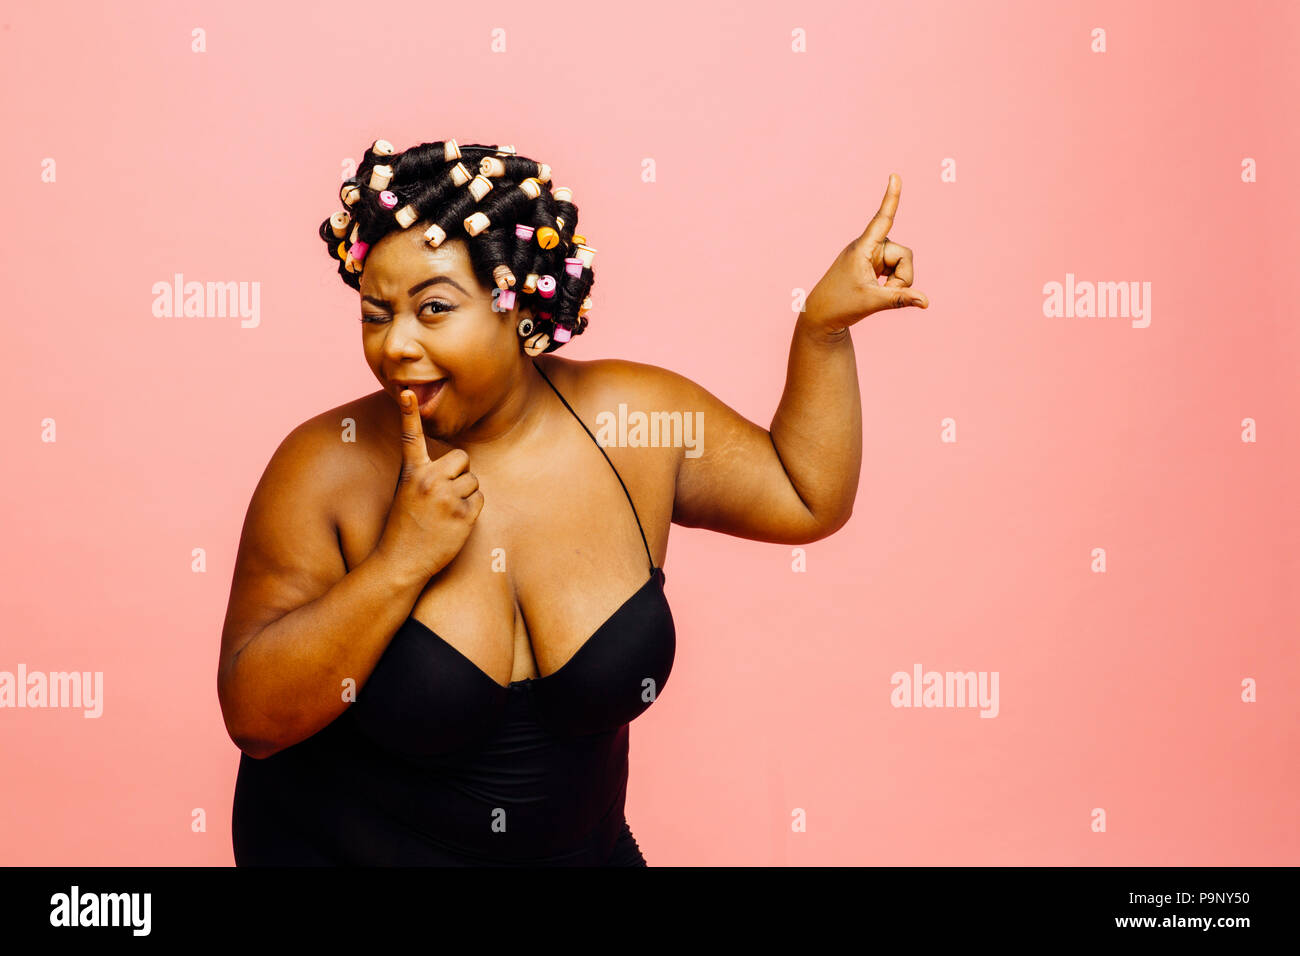 Woman with hair curlers and black camisole, winking and pointing up, isolated on pink background Stock Photo